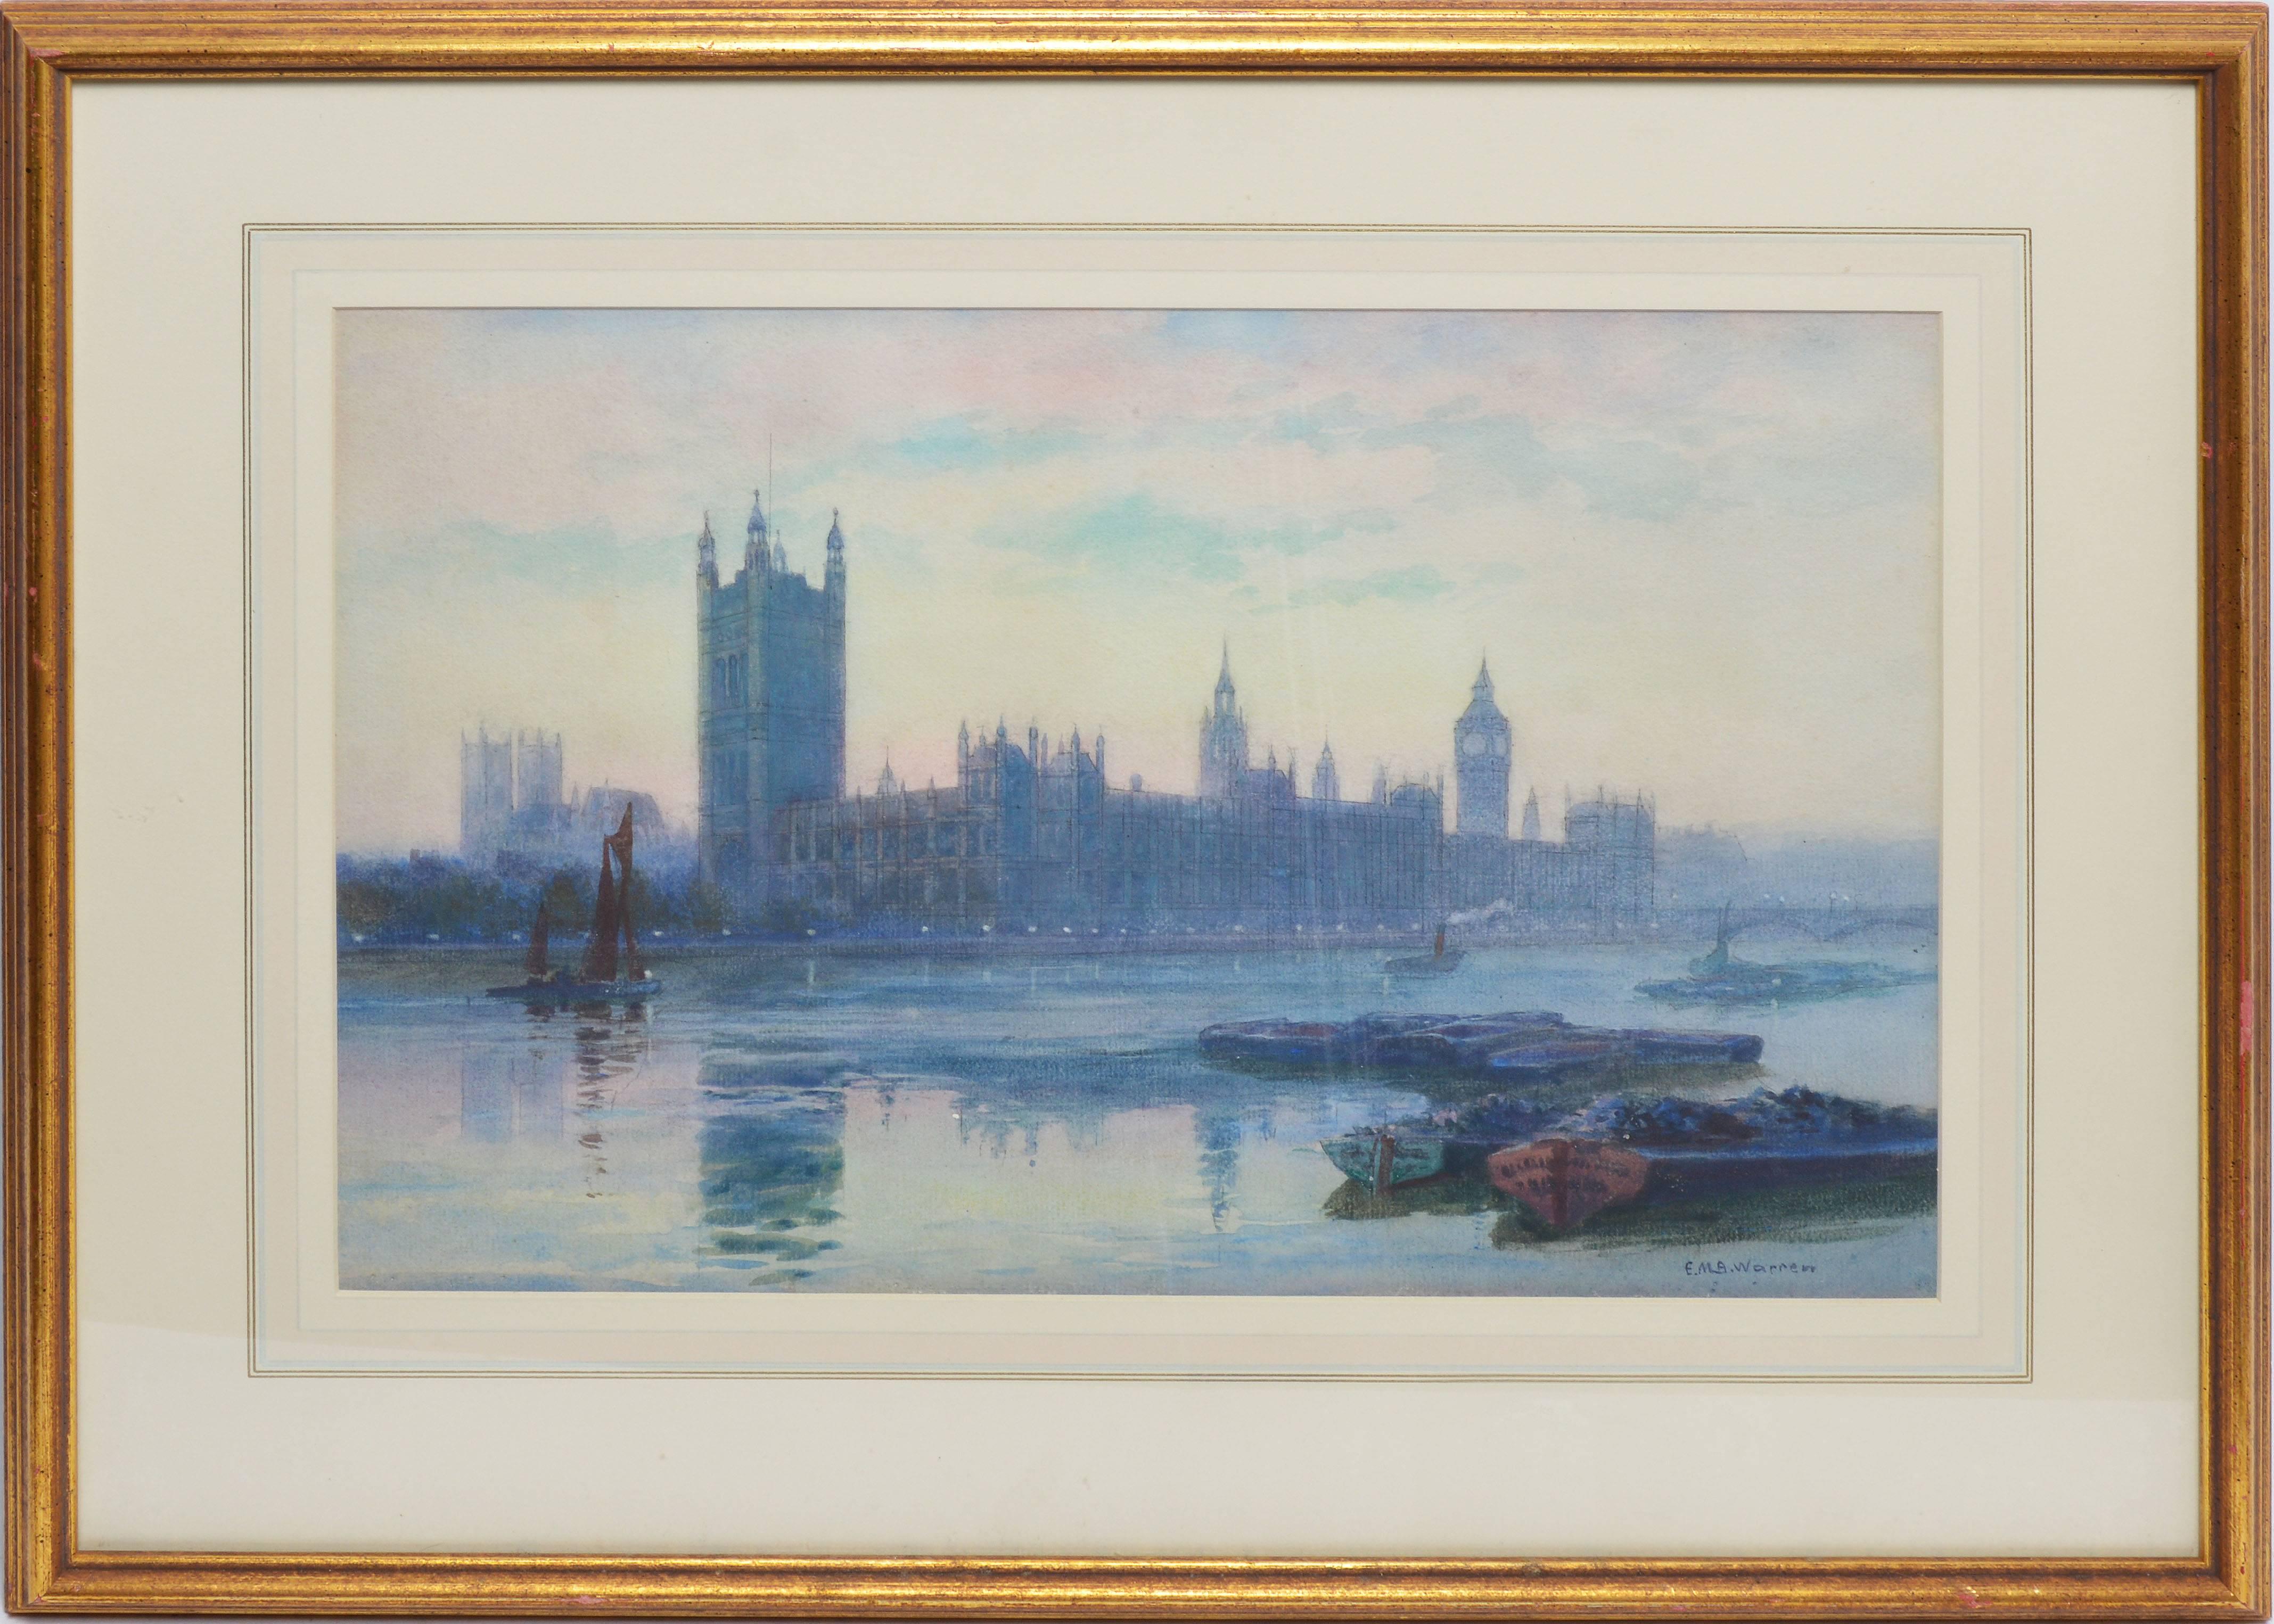 Impressionist view of London by Emily Warren  (1870 - 1956).  Gouache and watercolor on paper, circa 1910.  Signed lower right.  Framed.  Image size, 16"L x 11"H, overall 22.5"L x 18"H.